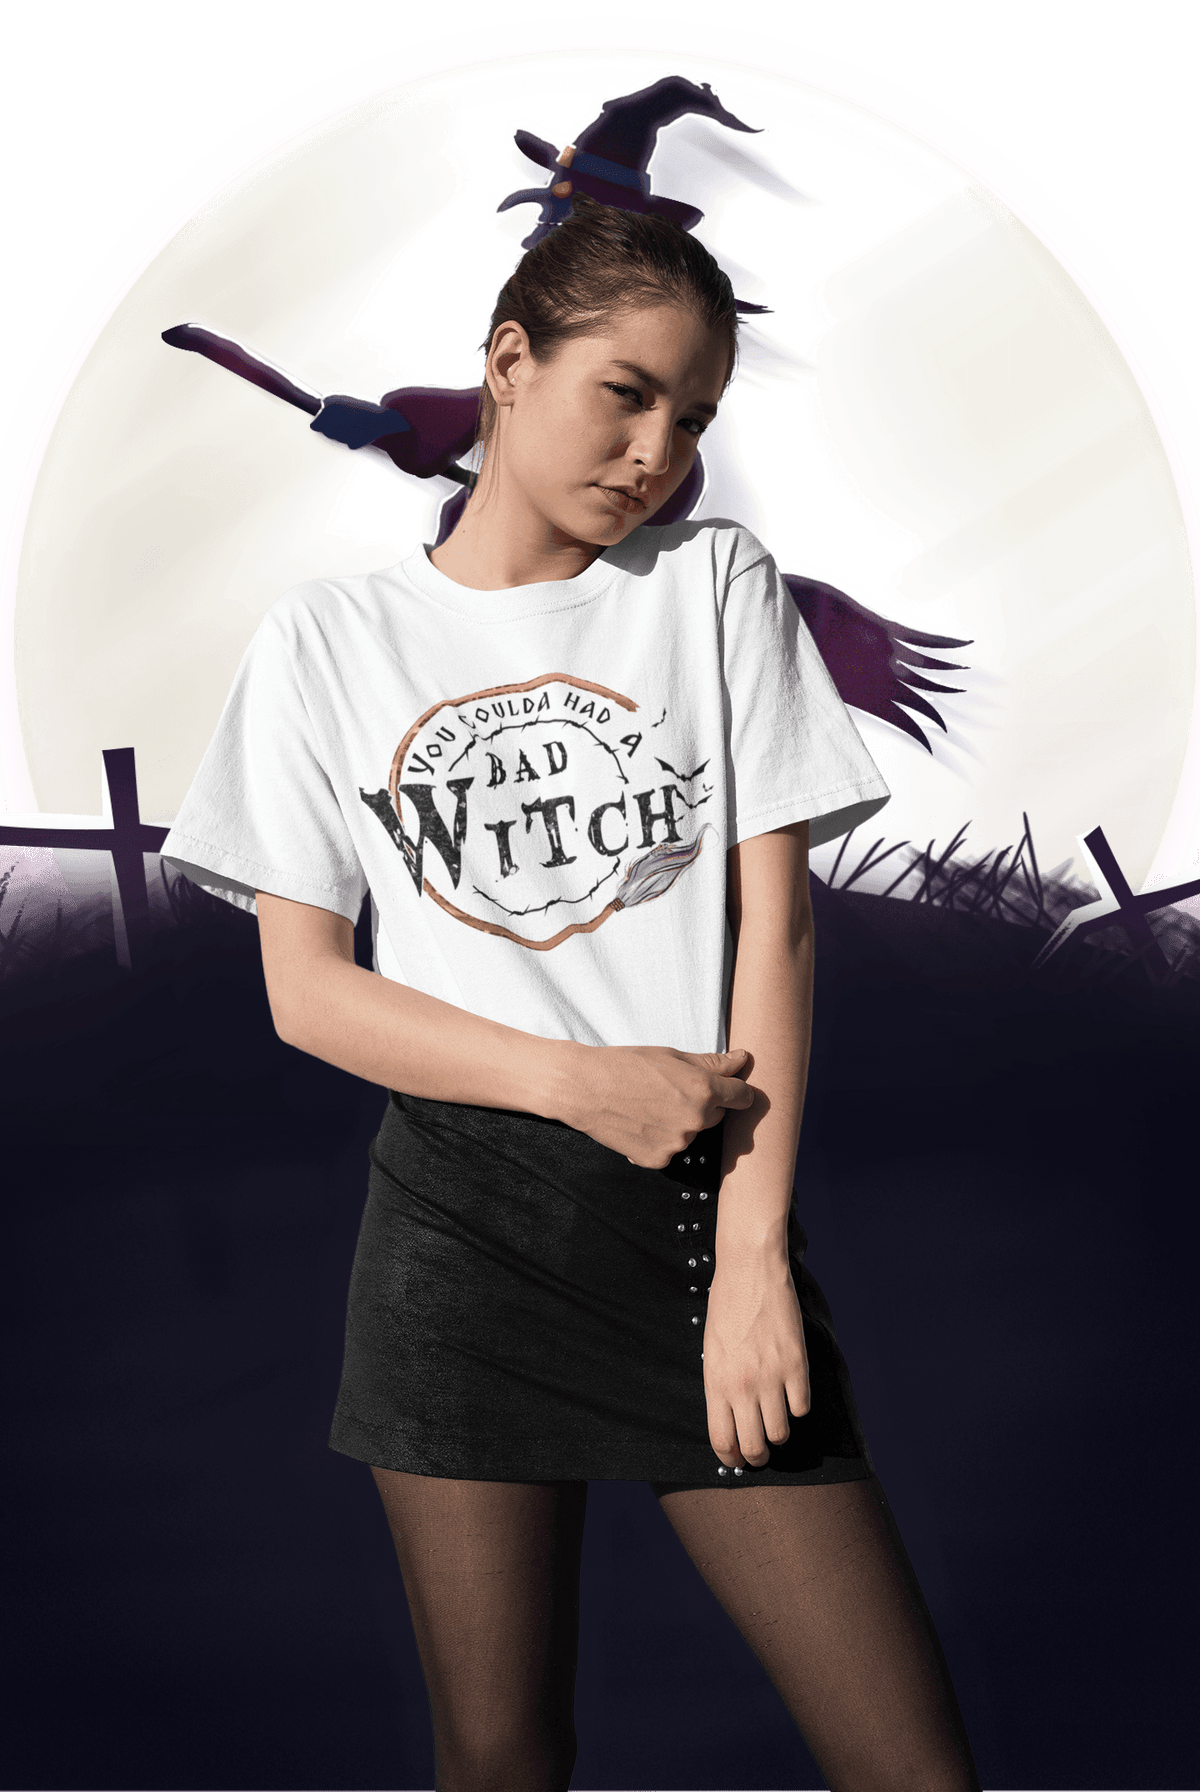 YOU COULDA HAD A BAD WITCH T-shirt - StylinArt